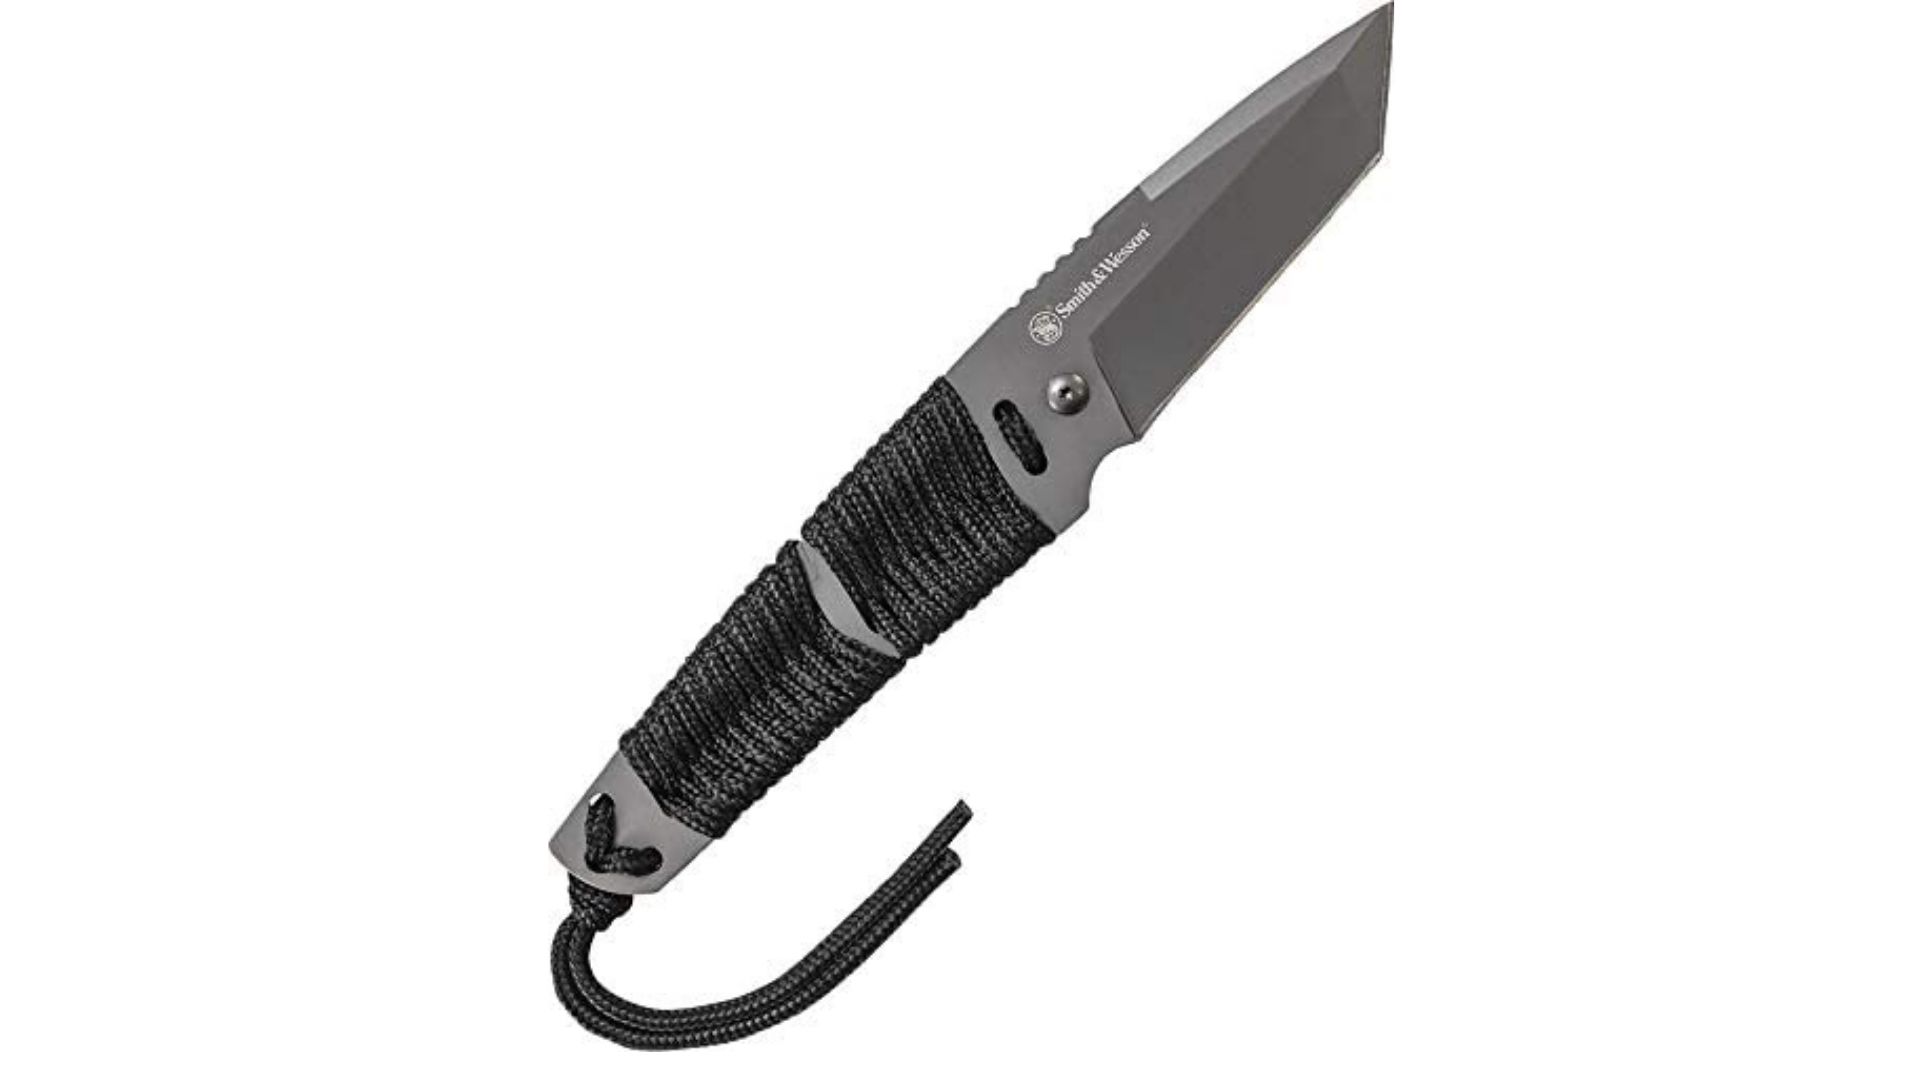 https://taskandpurpose.com/uploads/2021/07/05/Smith-Wesson-SW910TA-7.9in-High-Carbon-S.S.-Full-Tang-Neck-Knife-Product-Card.jpg?auto=webp&width=800&canvas=16:10,offset-x50